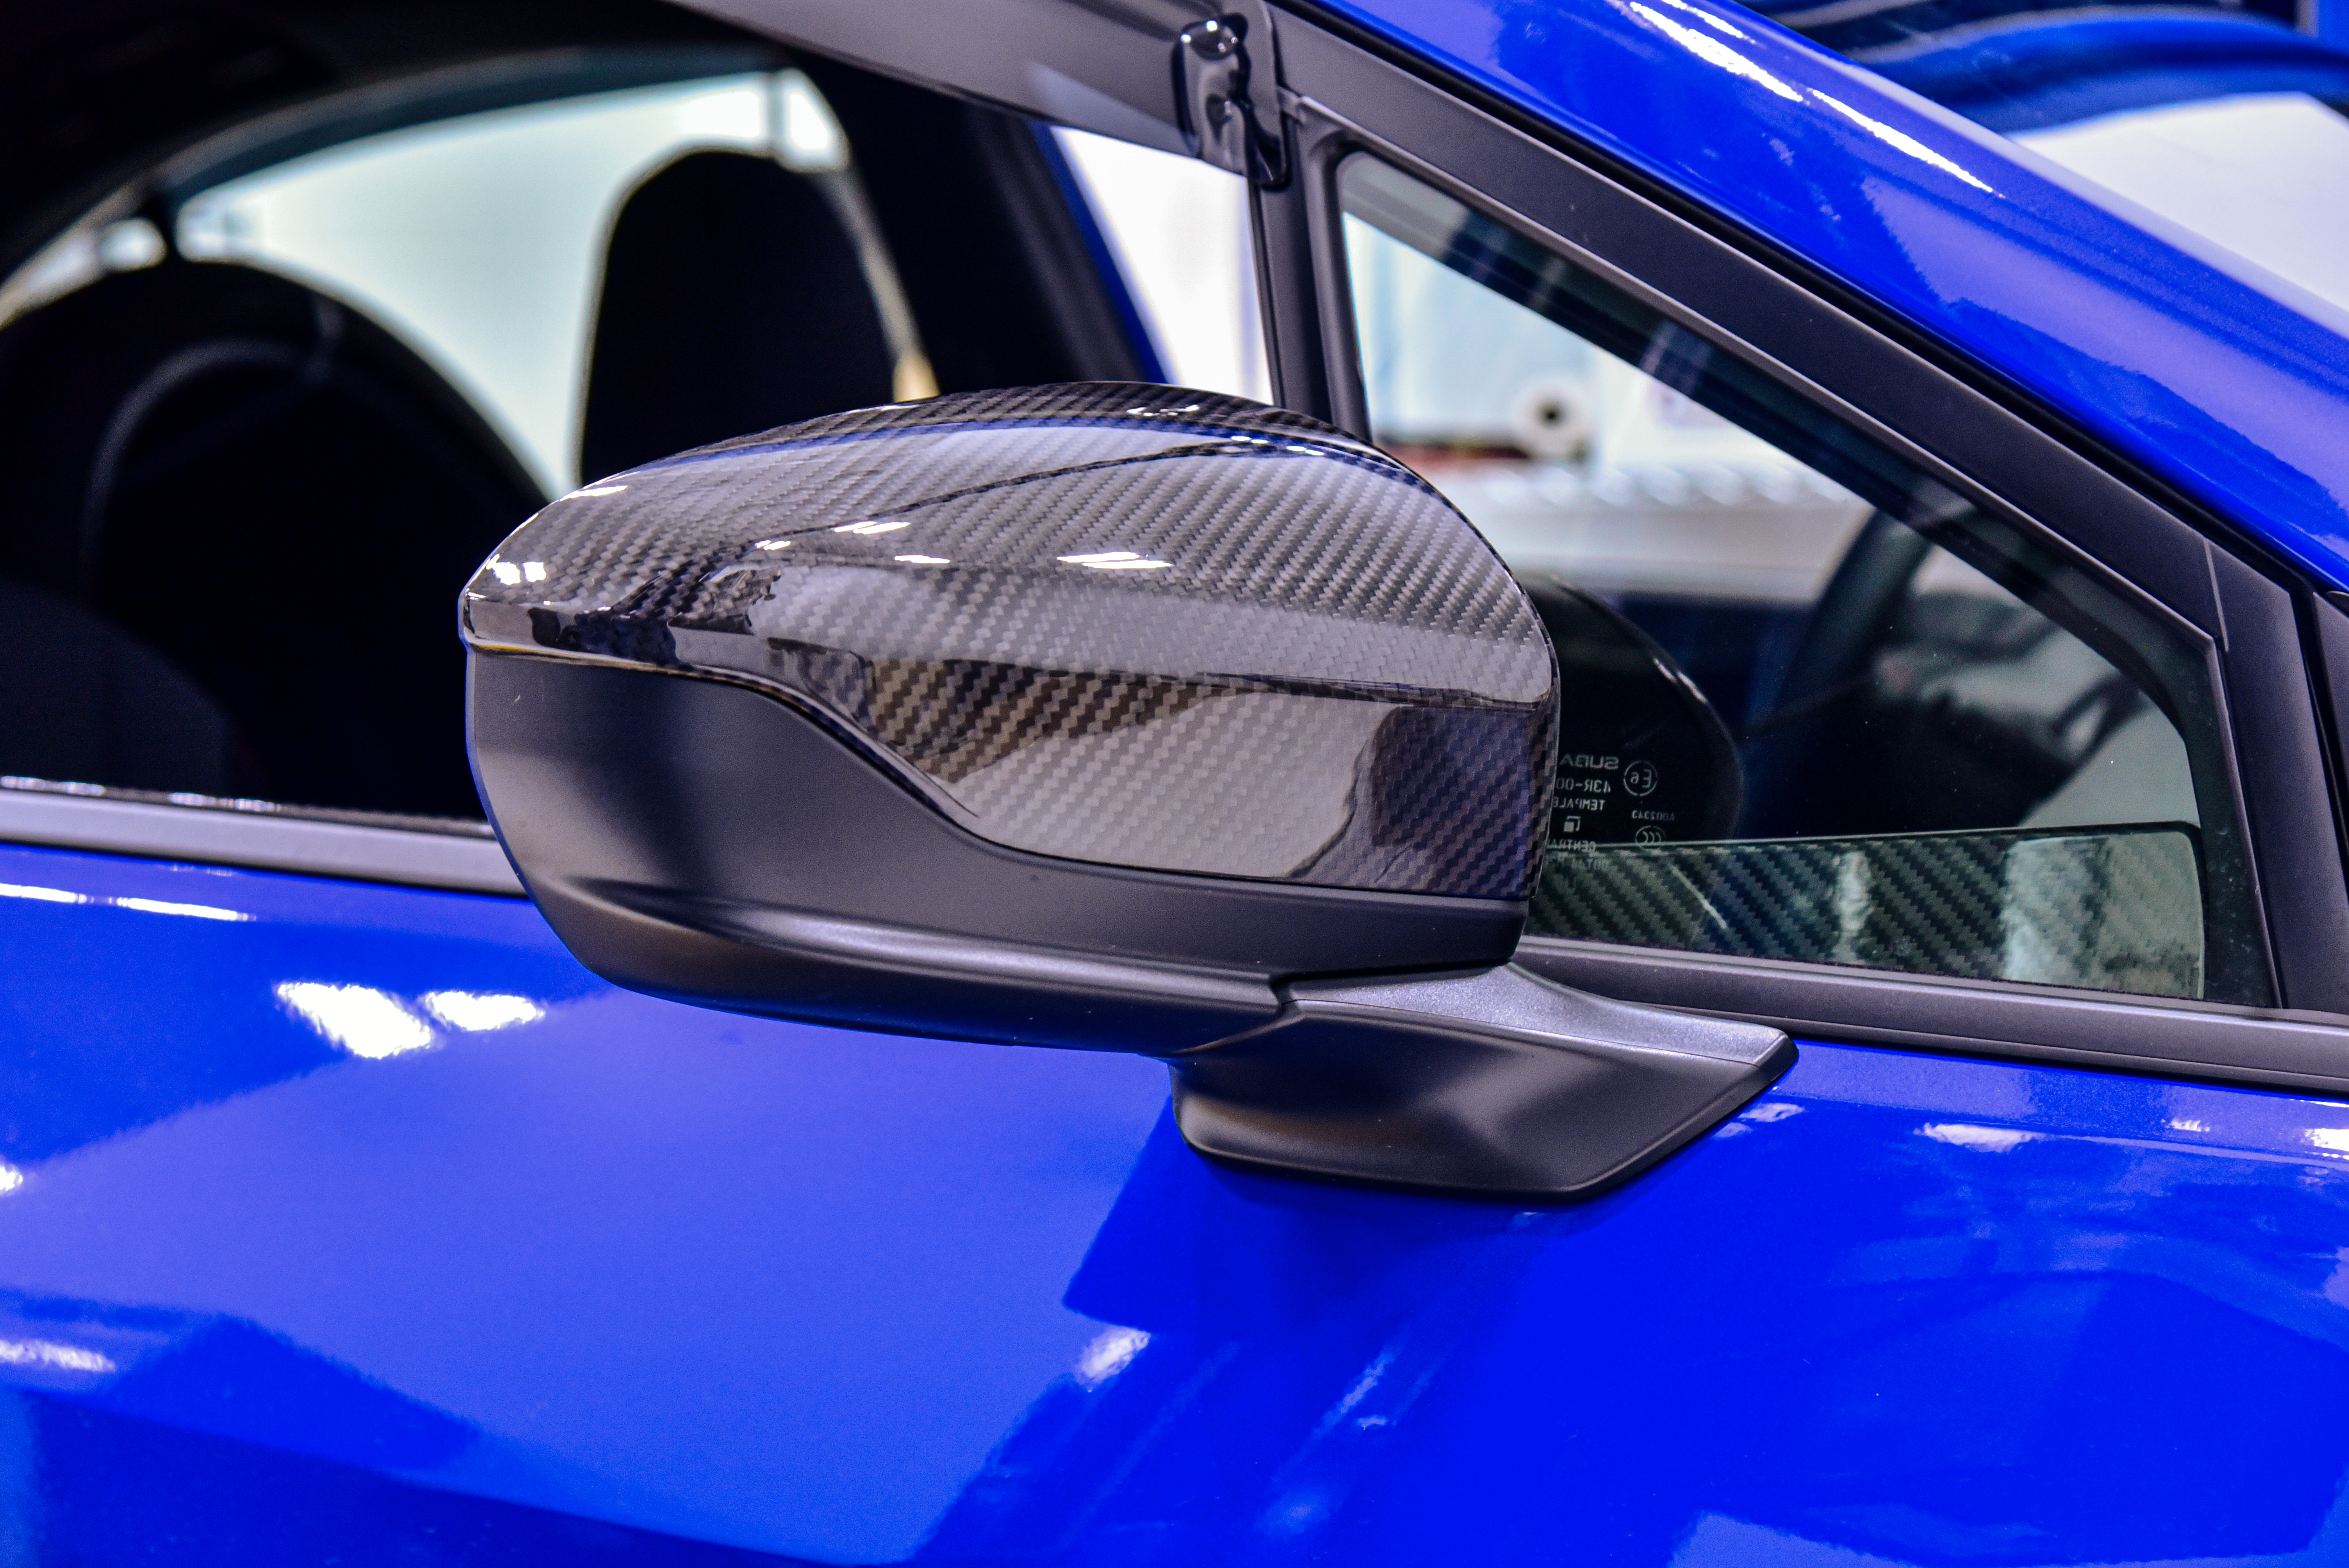 OLM Carbon Fiber Mirror Covers installed on a 2022 Subaru WRX